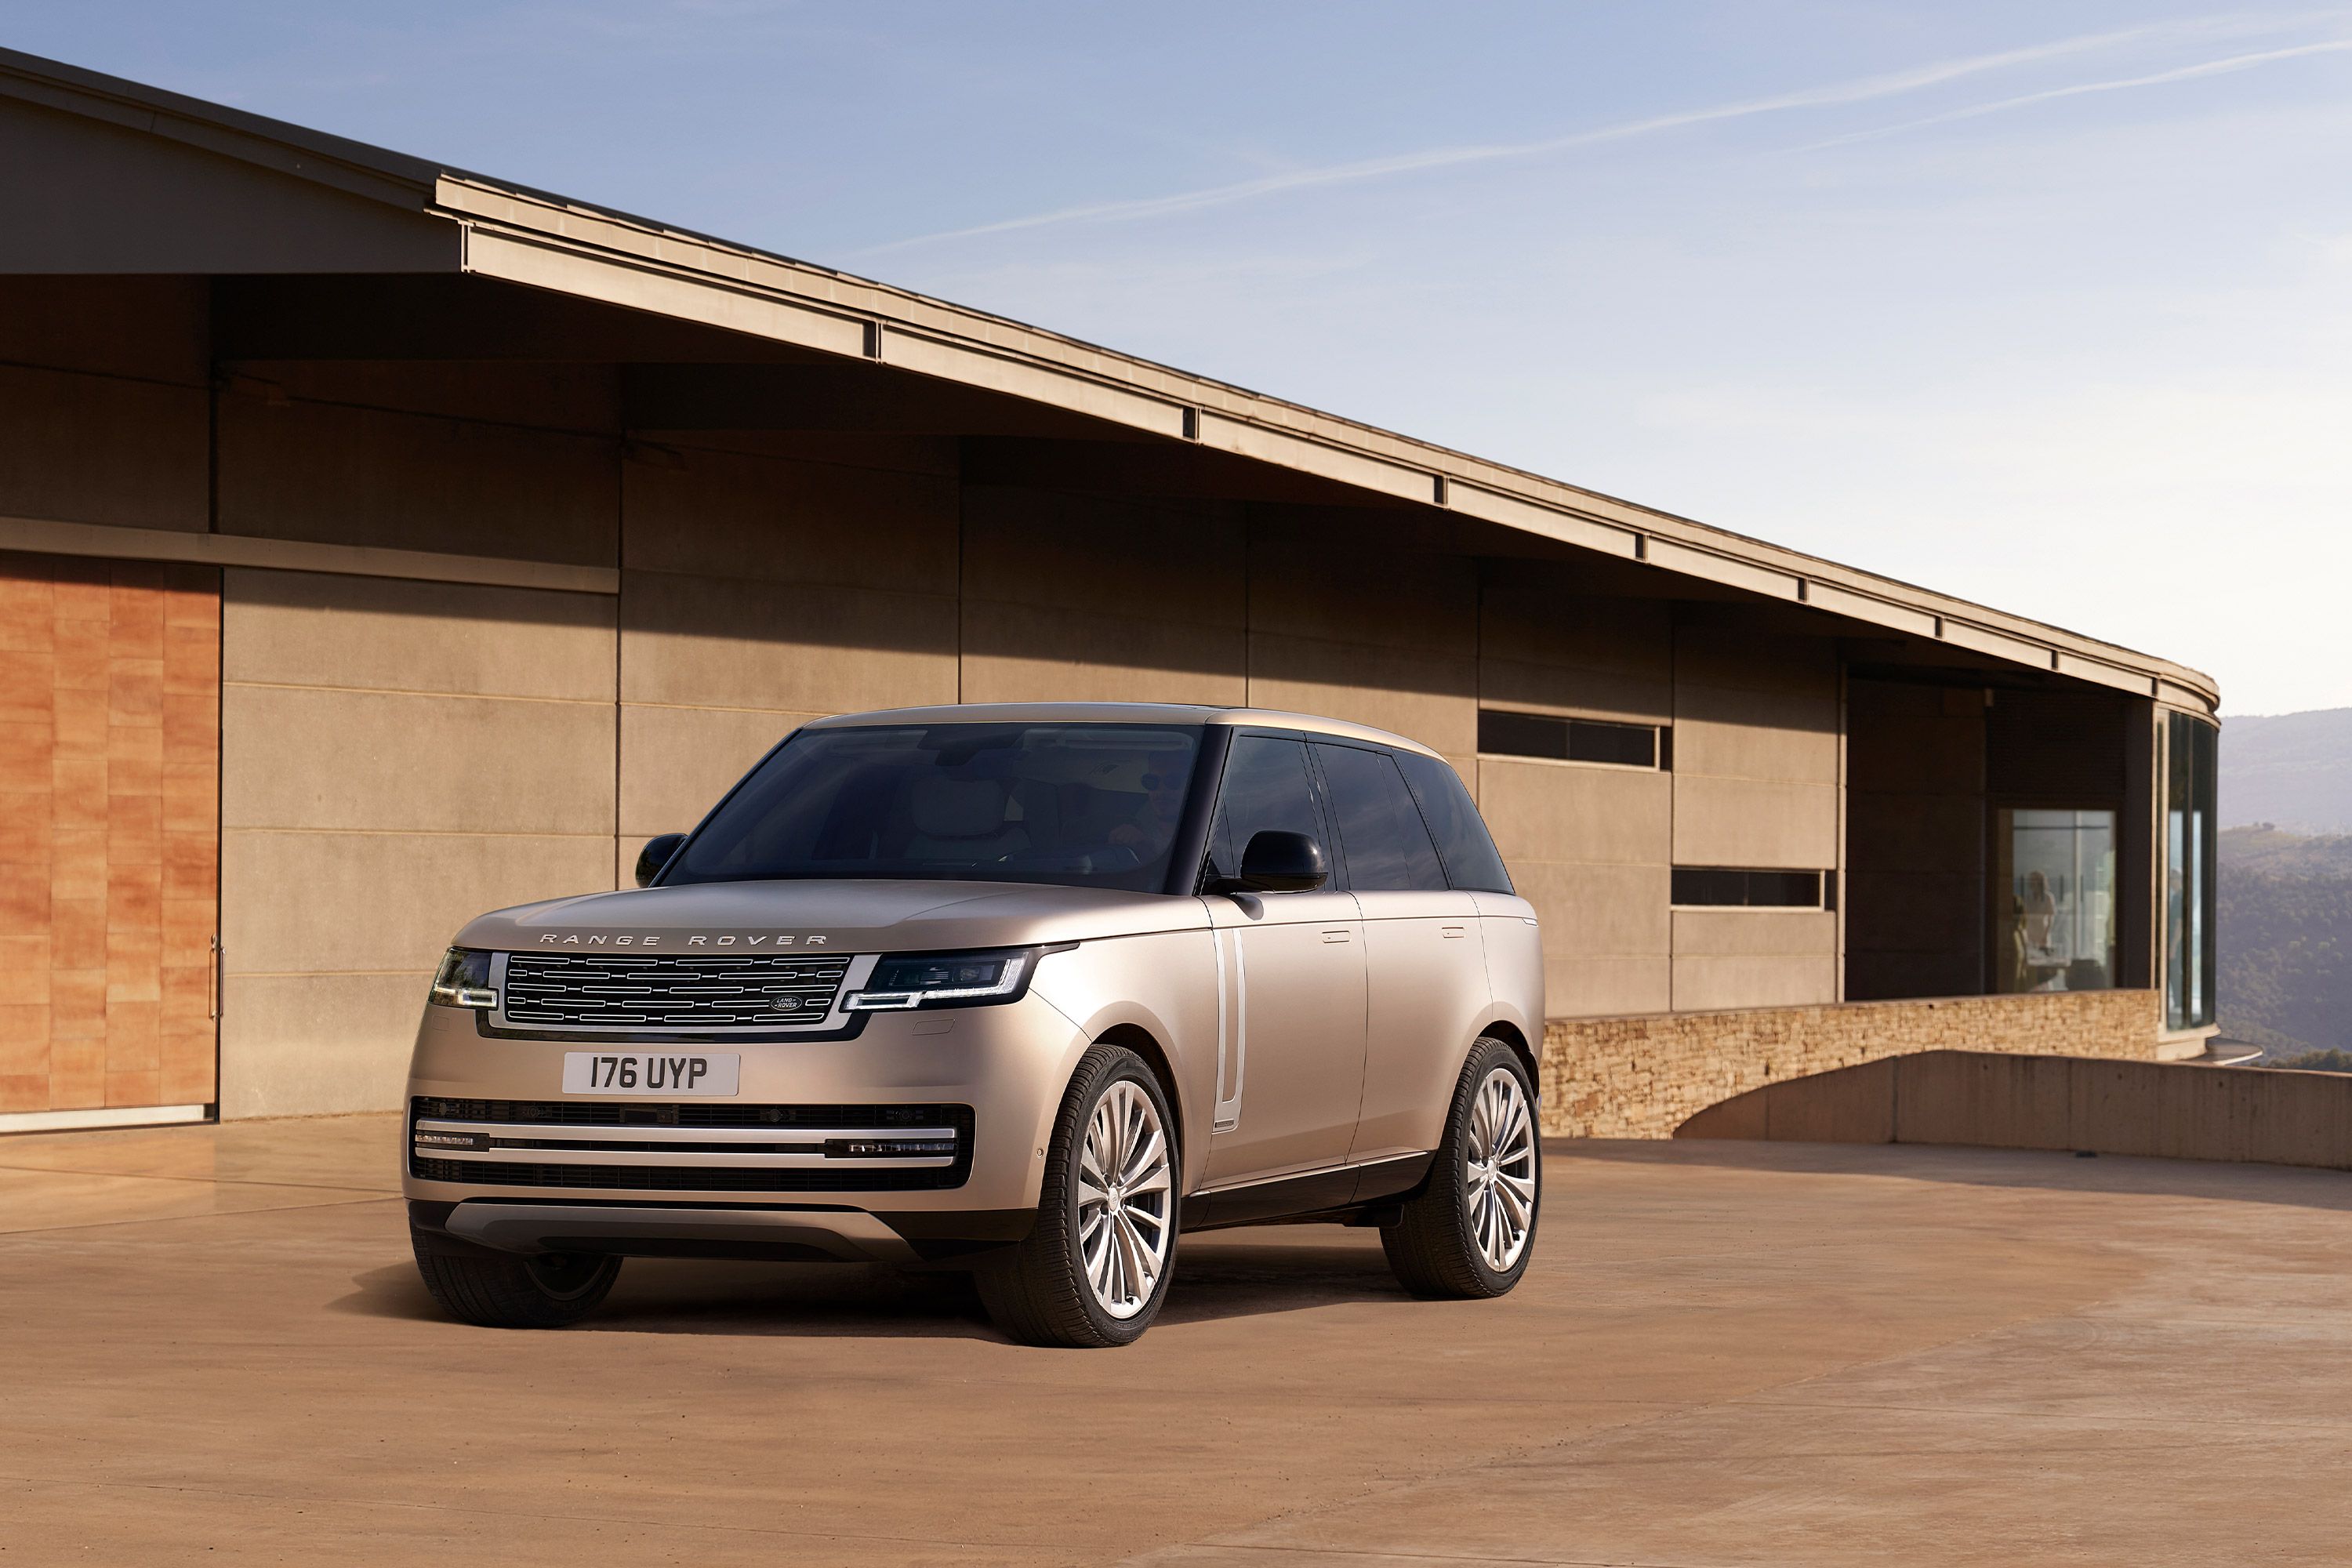 2022 Rover Range Rover Continues the Brand's Luxury Legacy